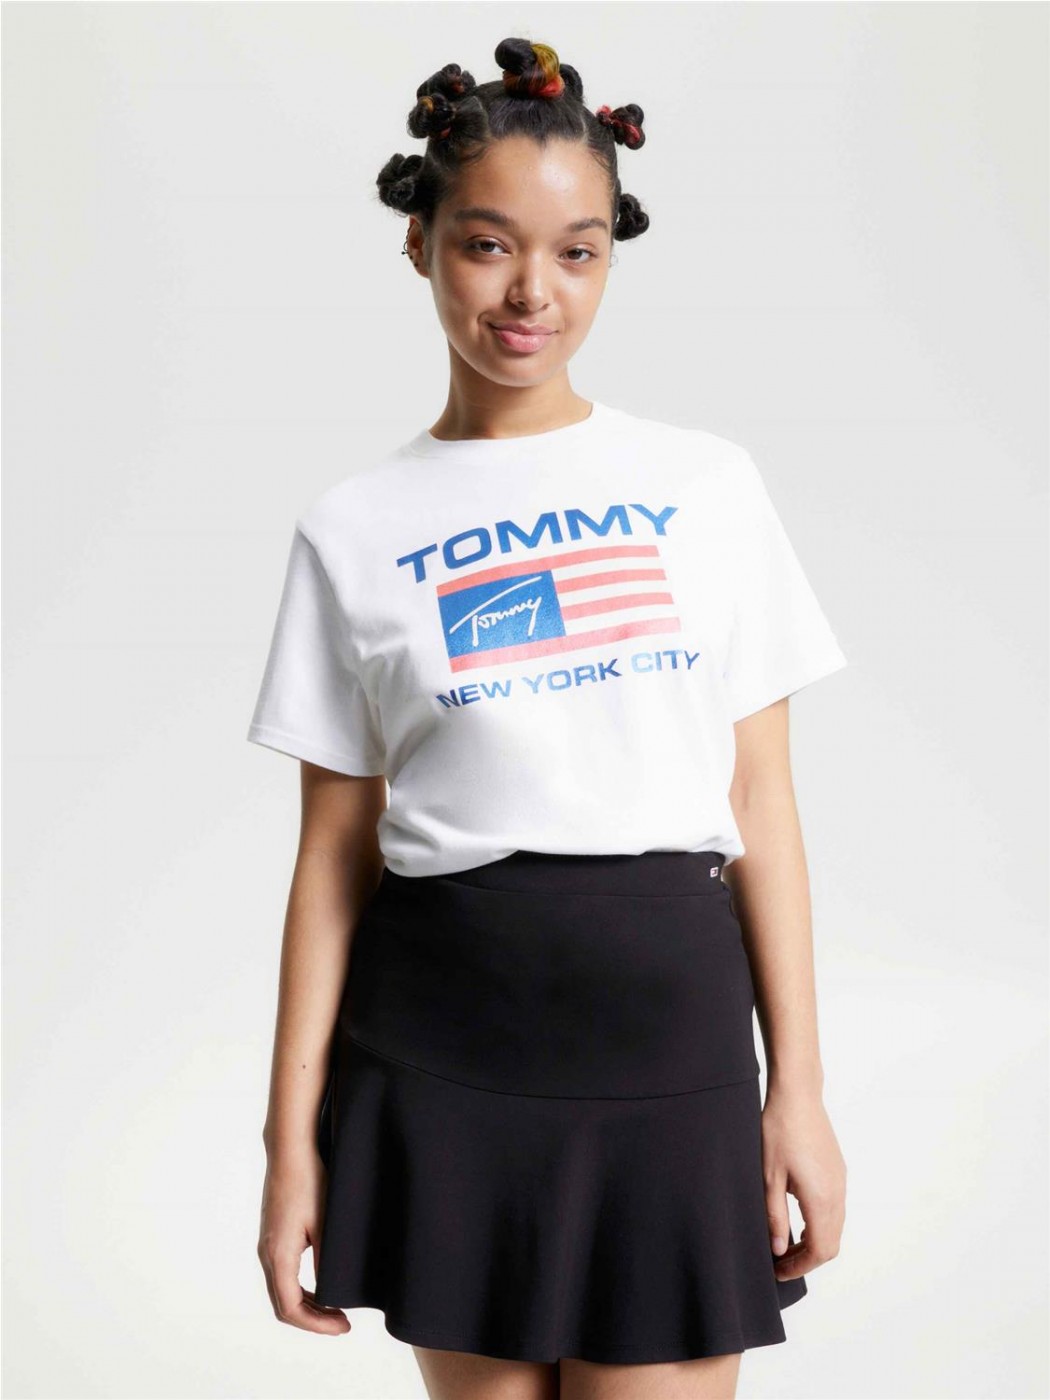 CAMISETA TOMMY JEANS MUJER...